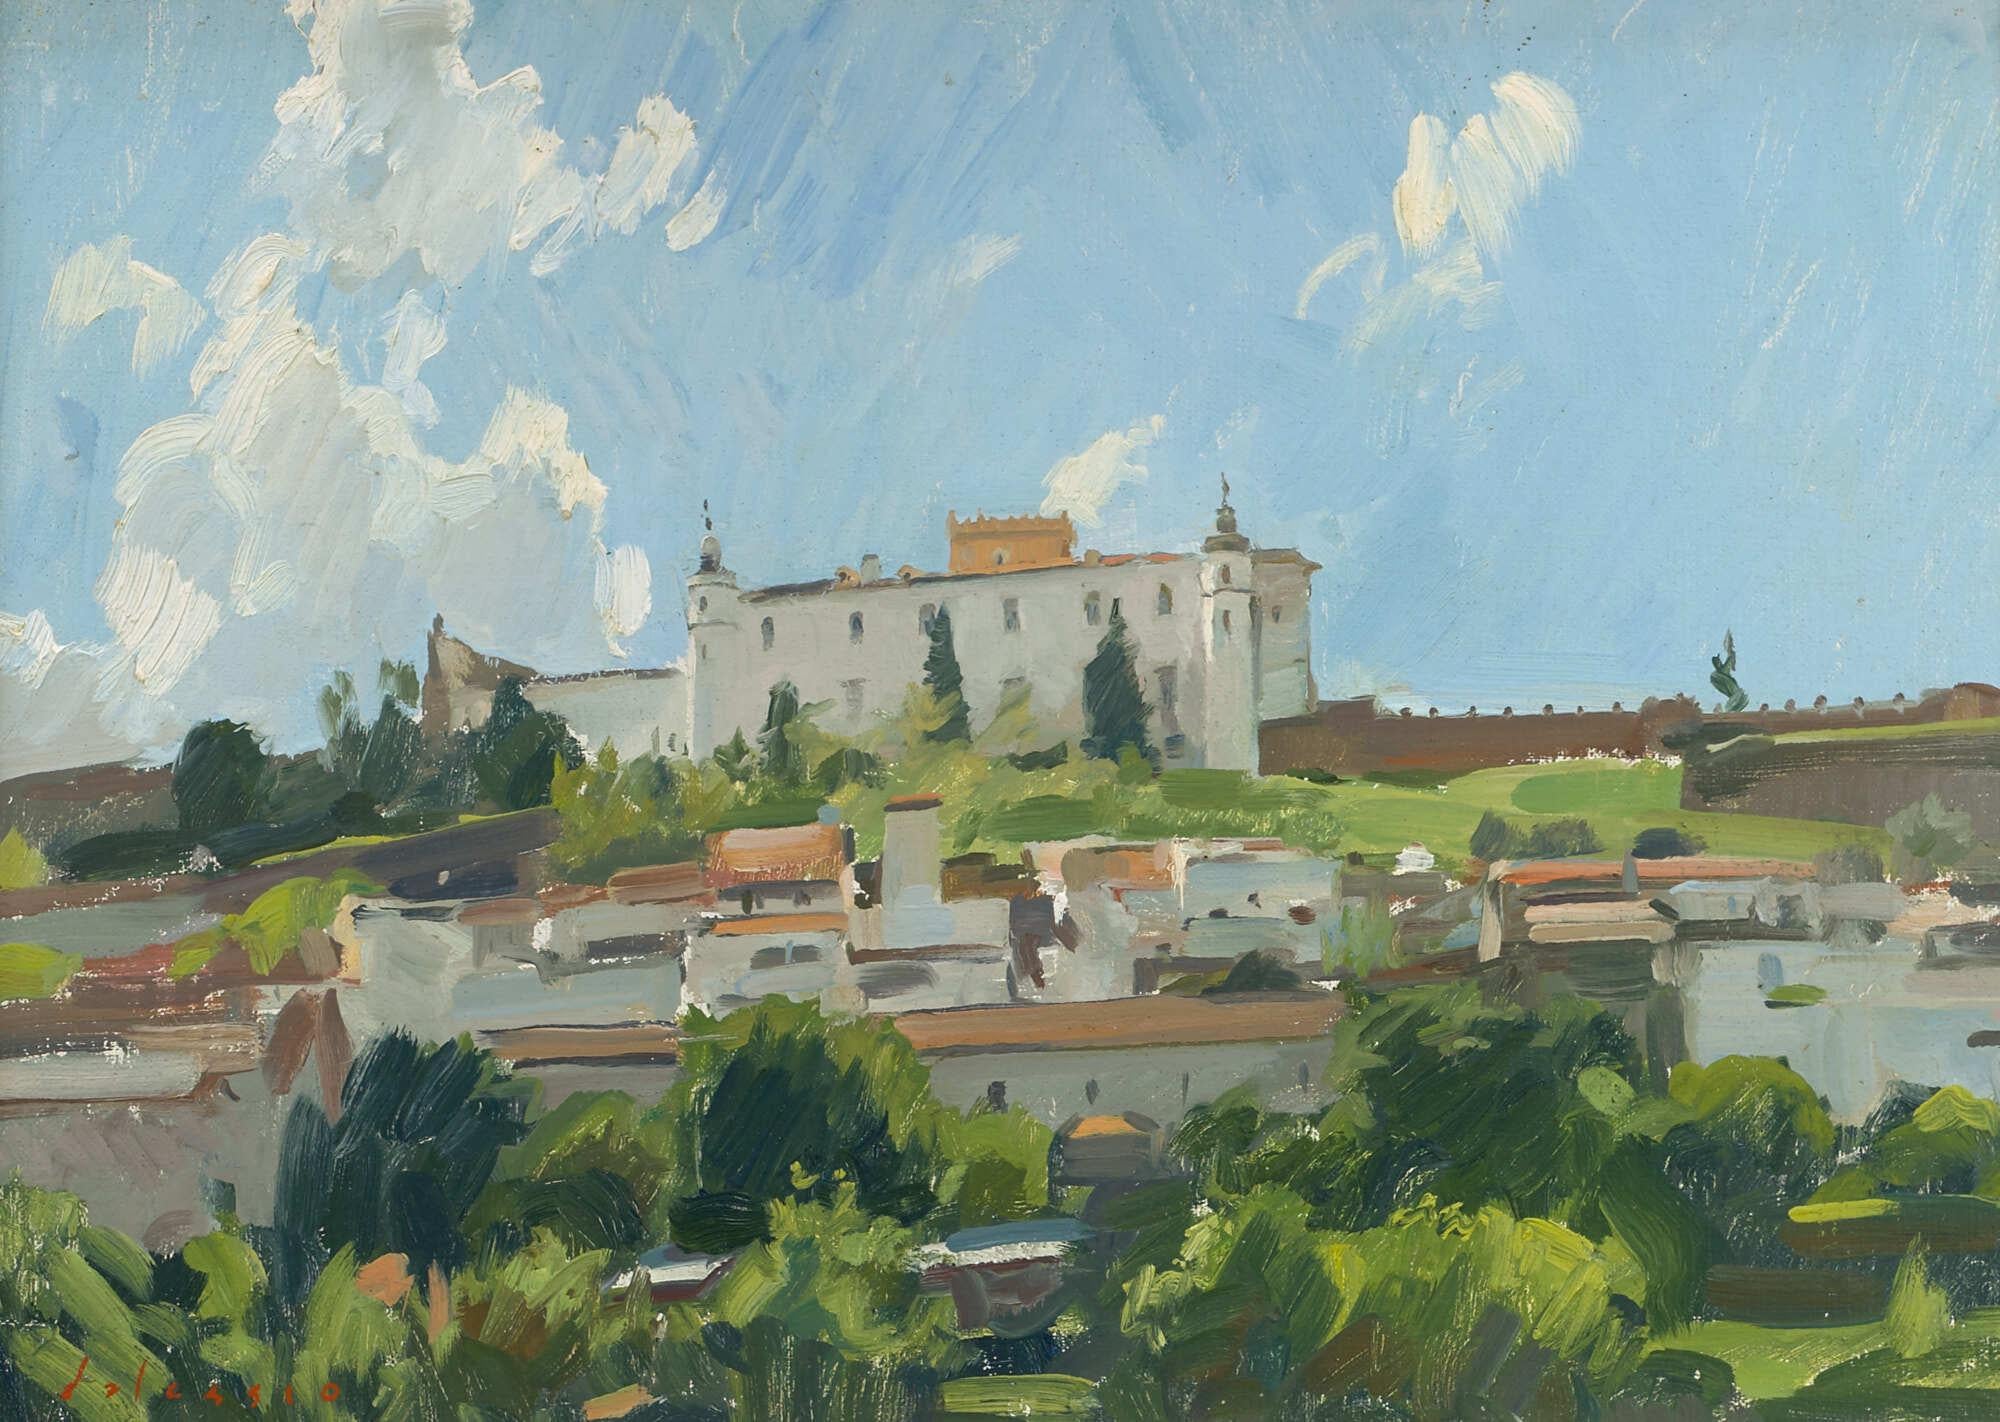 Marc Dalessio Still-Life Painting - "Estremoz Castle, Spring" bright landscape in Portugal, painted en plein air